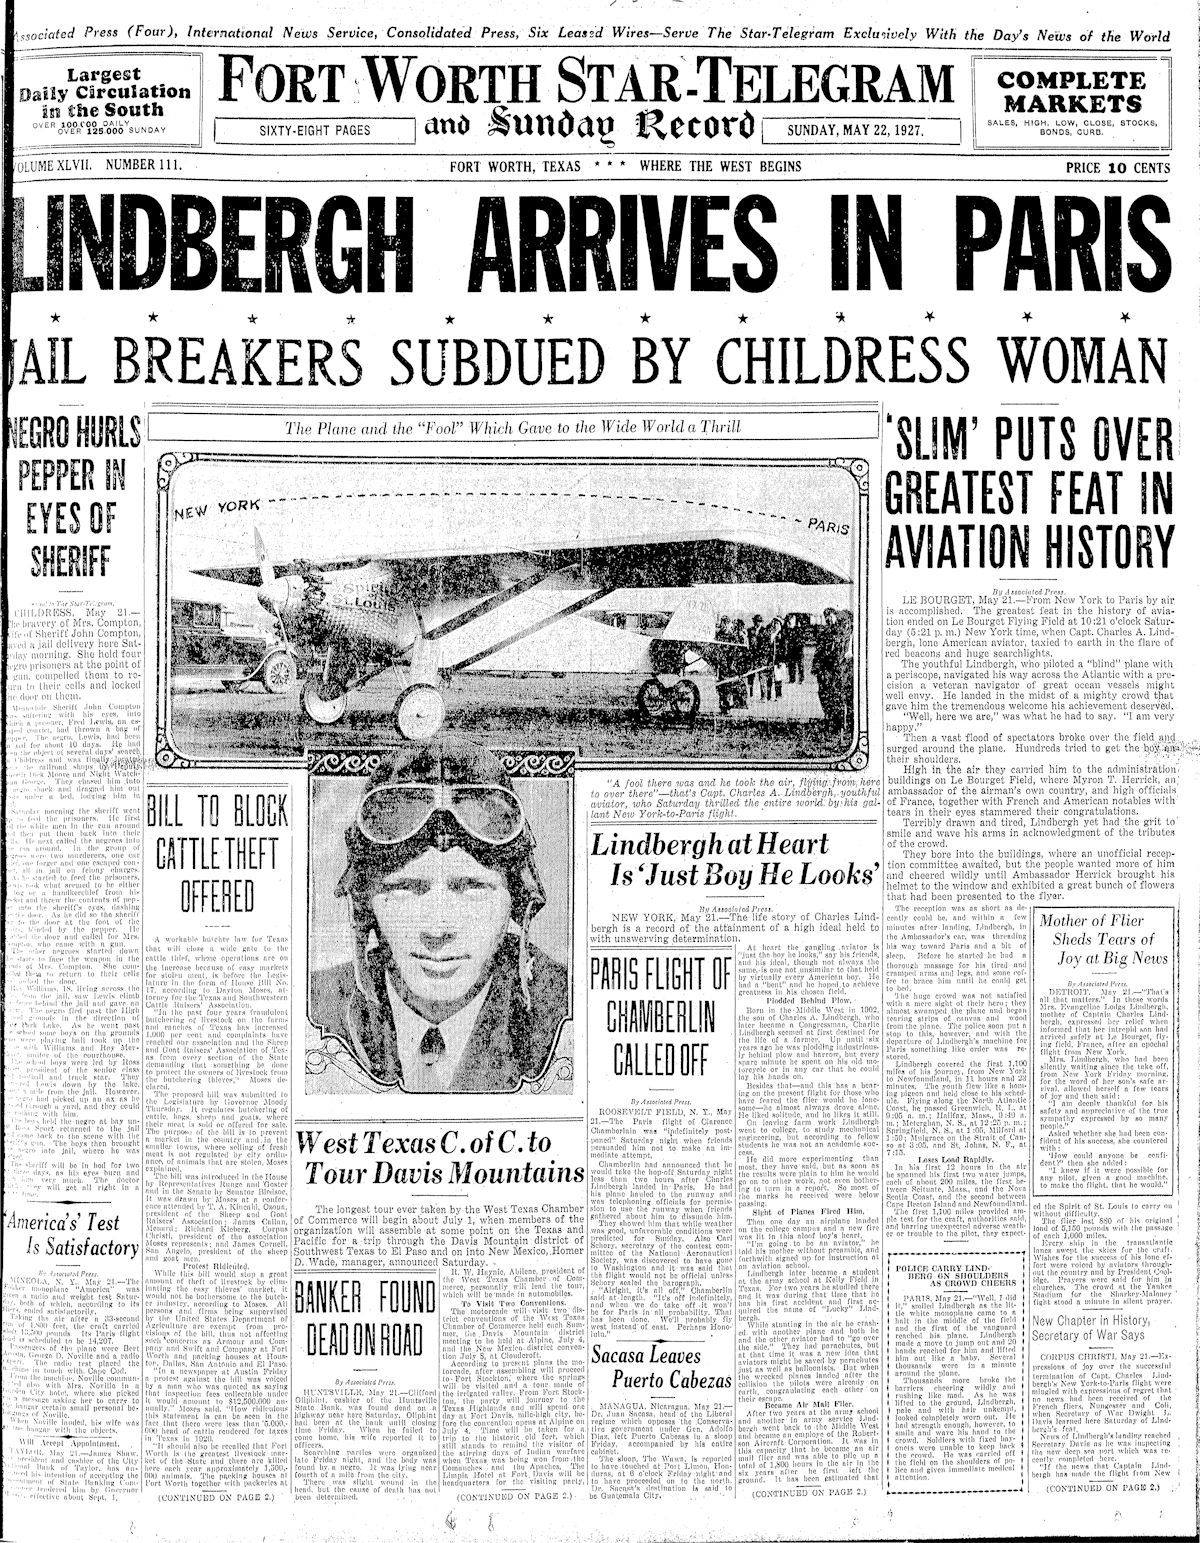 This week in history: The flight of Charles Lindbergh - Deseret News